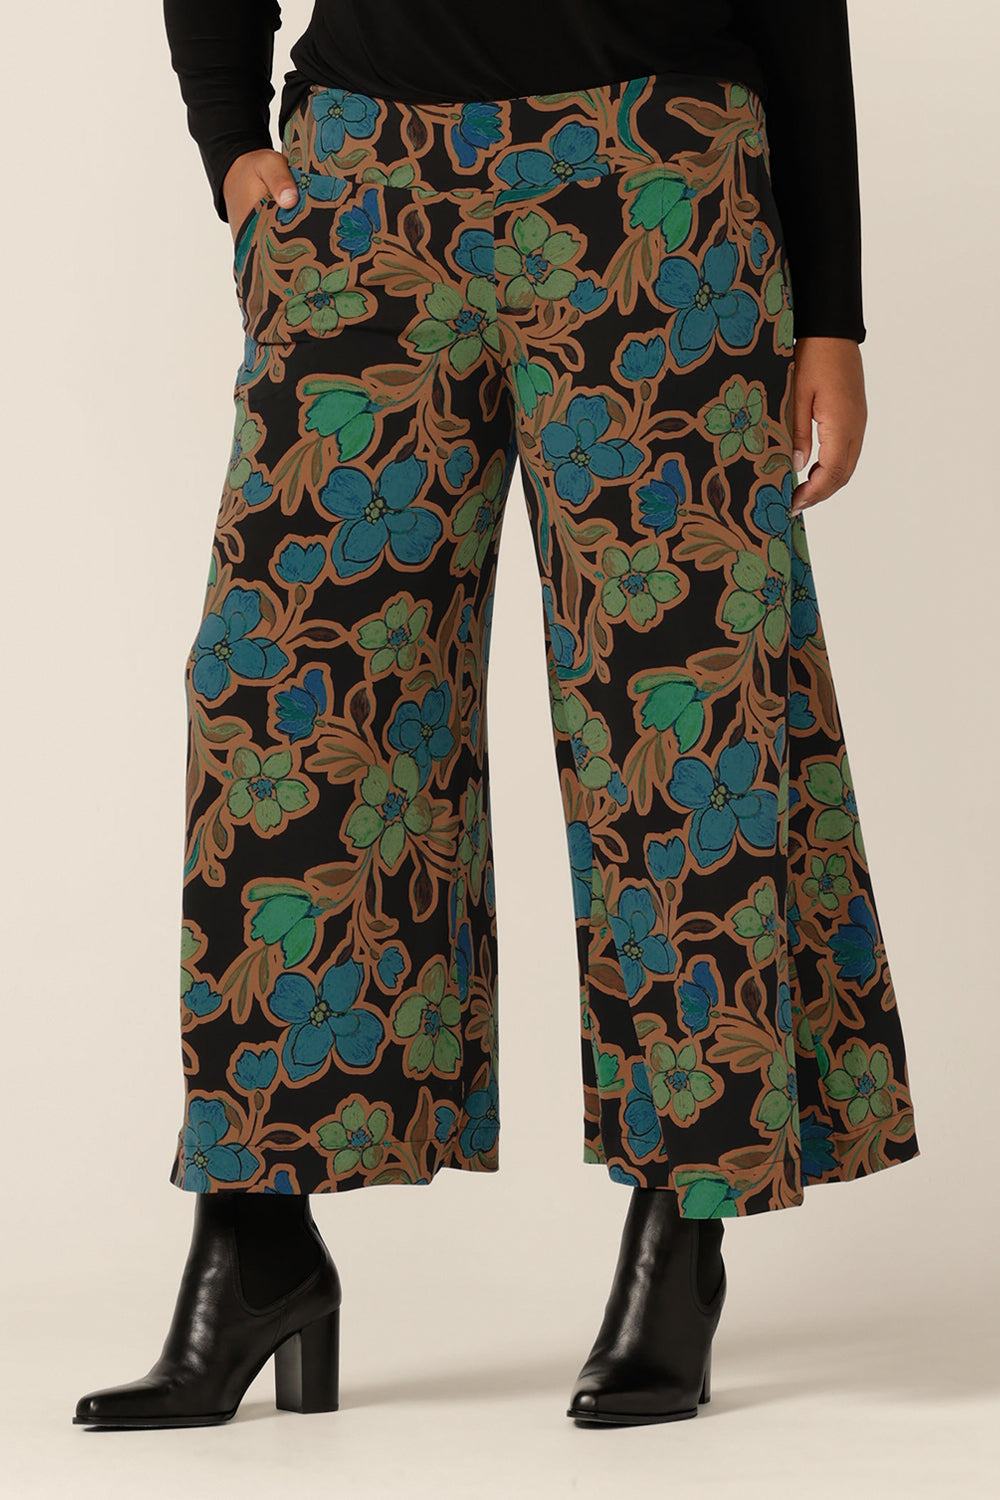 The Presley Pants in Secret Garden - a mid-rise, pull-on pant with wide legs and stretch jersey fabrication, worn with a long sleeve black top. Made in Australia by women's clothing label L&F. Shop size inclusive trousers in sizes 8 to 24 now.